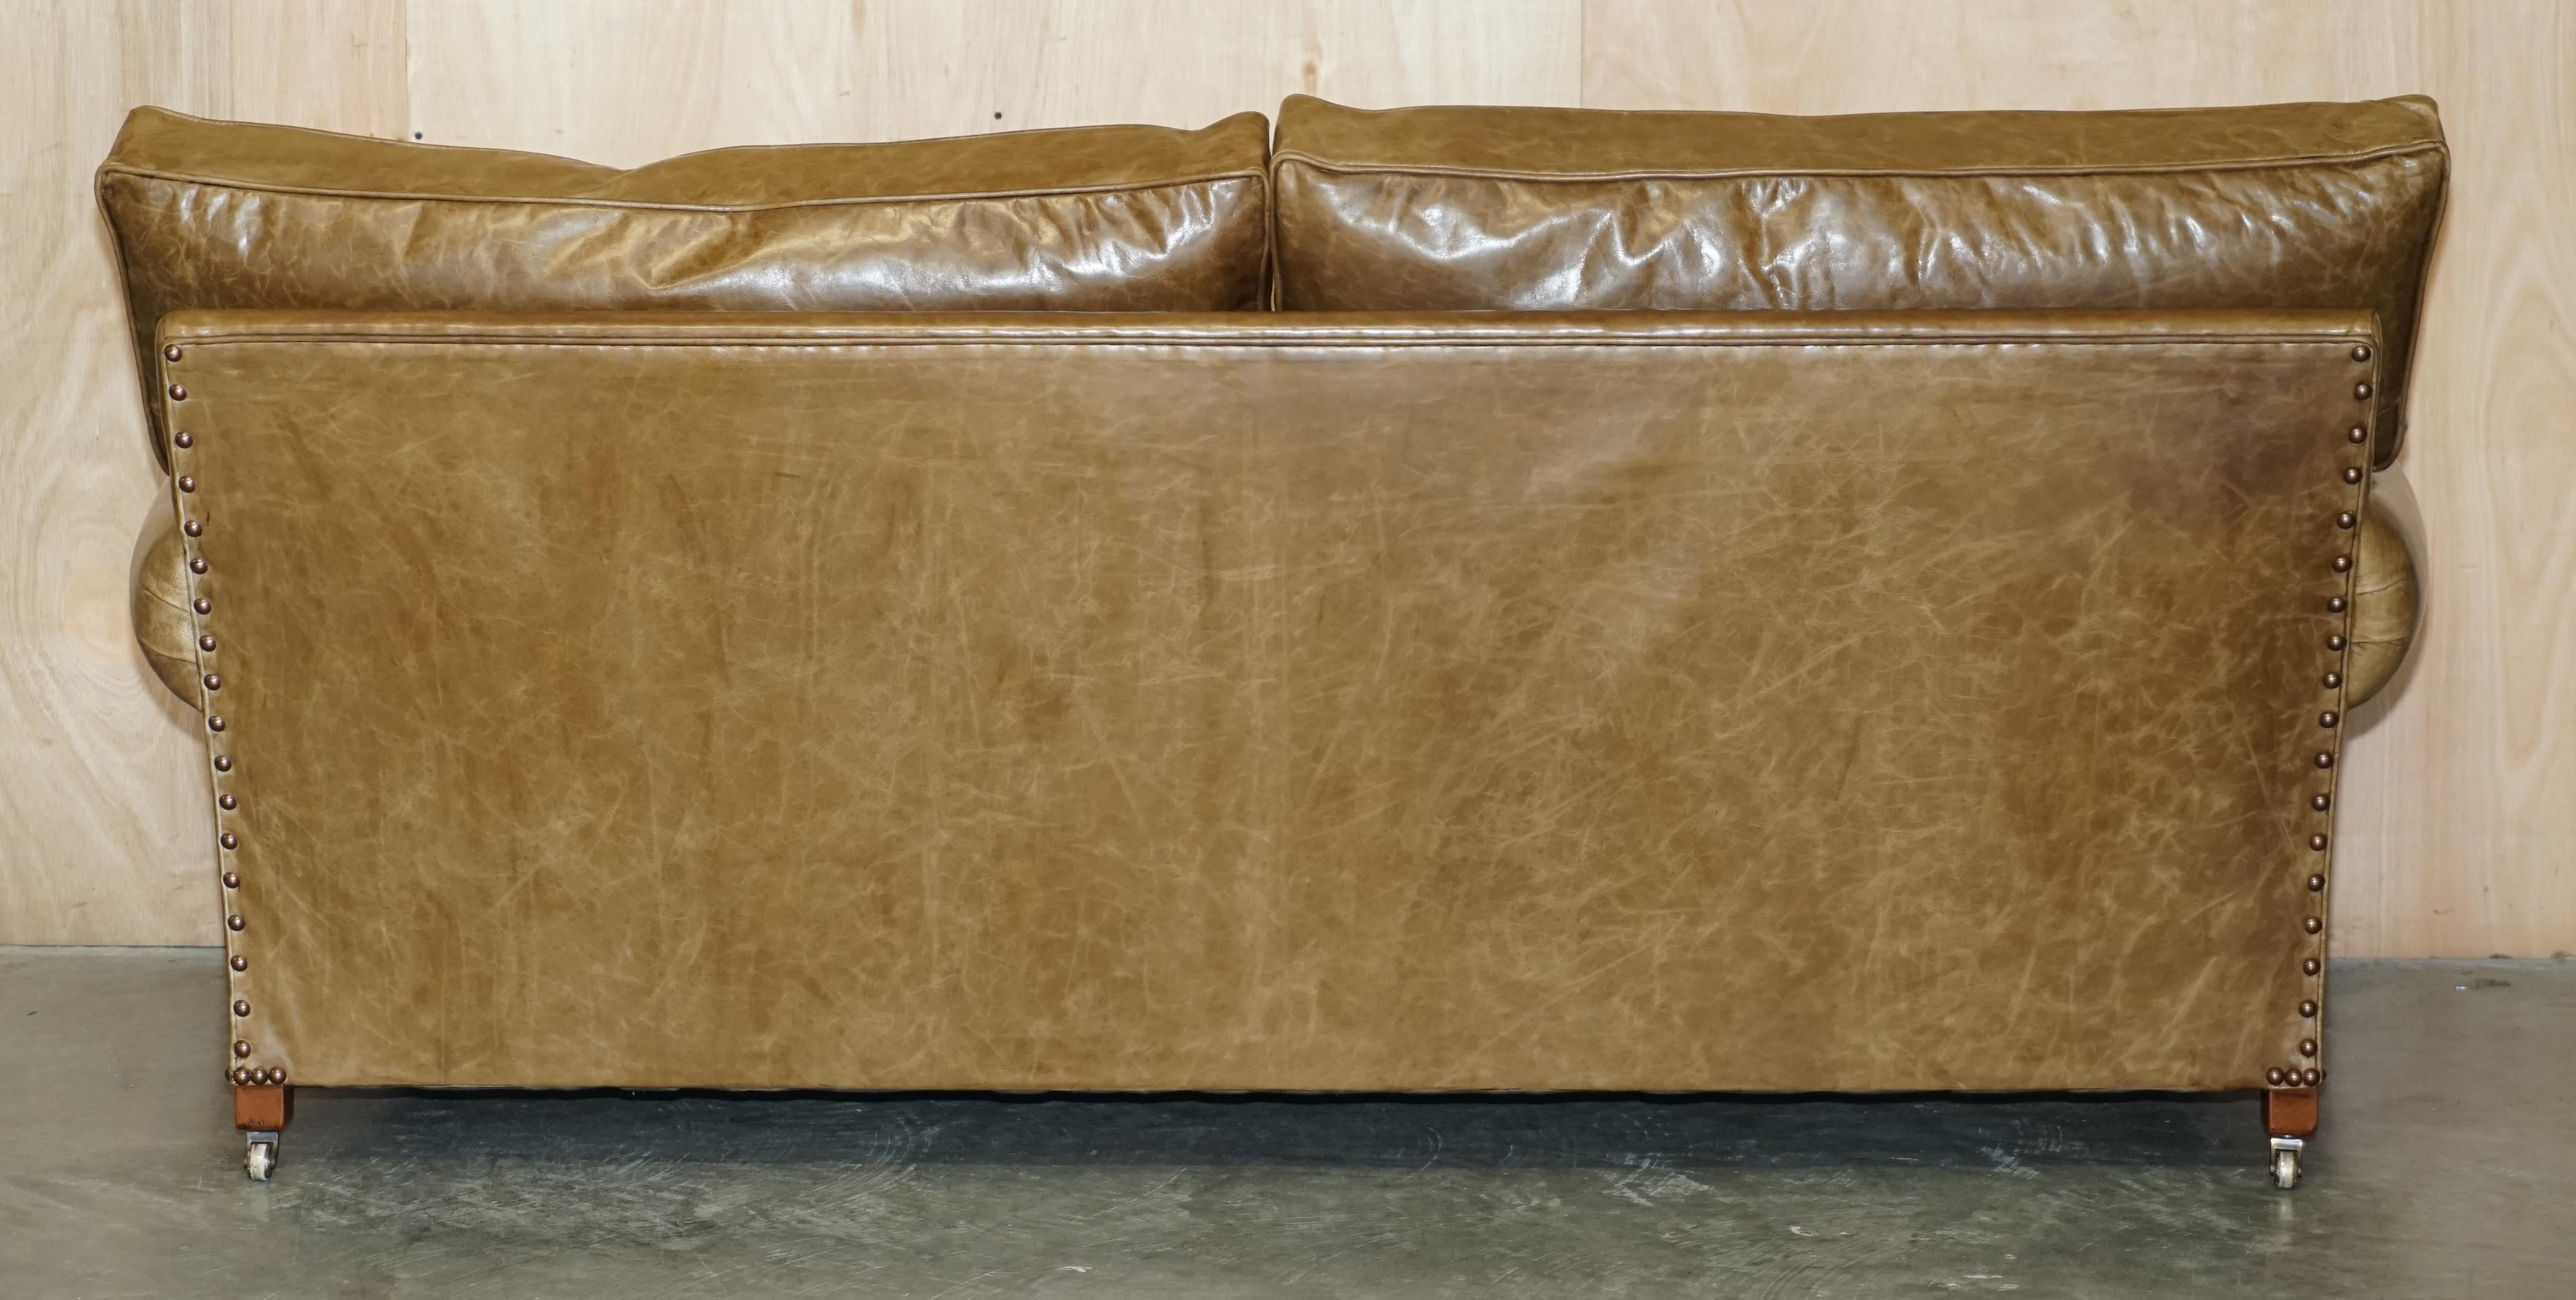 1 OF 2 GEORGE SMITH FULL SCROLL ARM CUSHiON BACK BROWN LEATHER SOFA For Sale 8